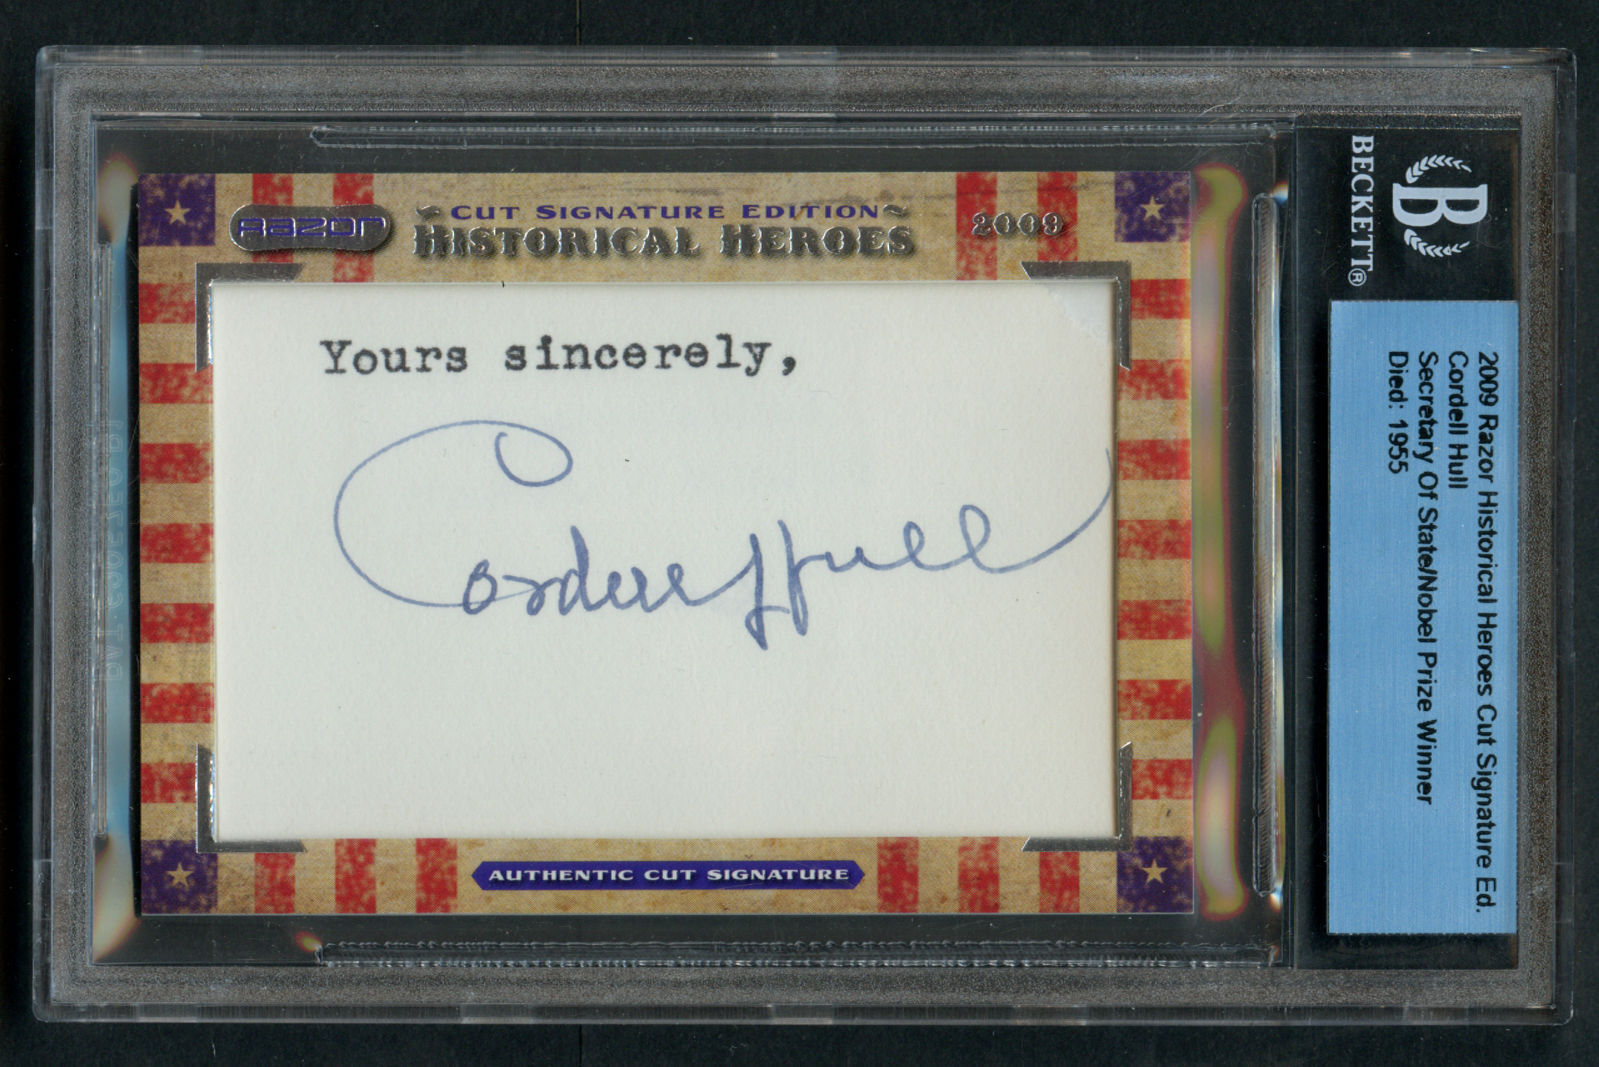 Cordell Hull (d. 1955) Noble Prize signed autograph auto 2009 Razor Historical